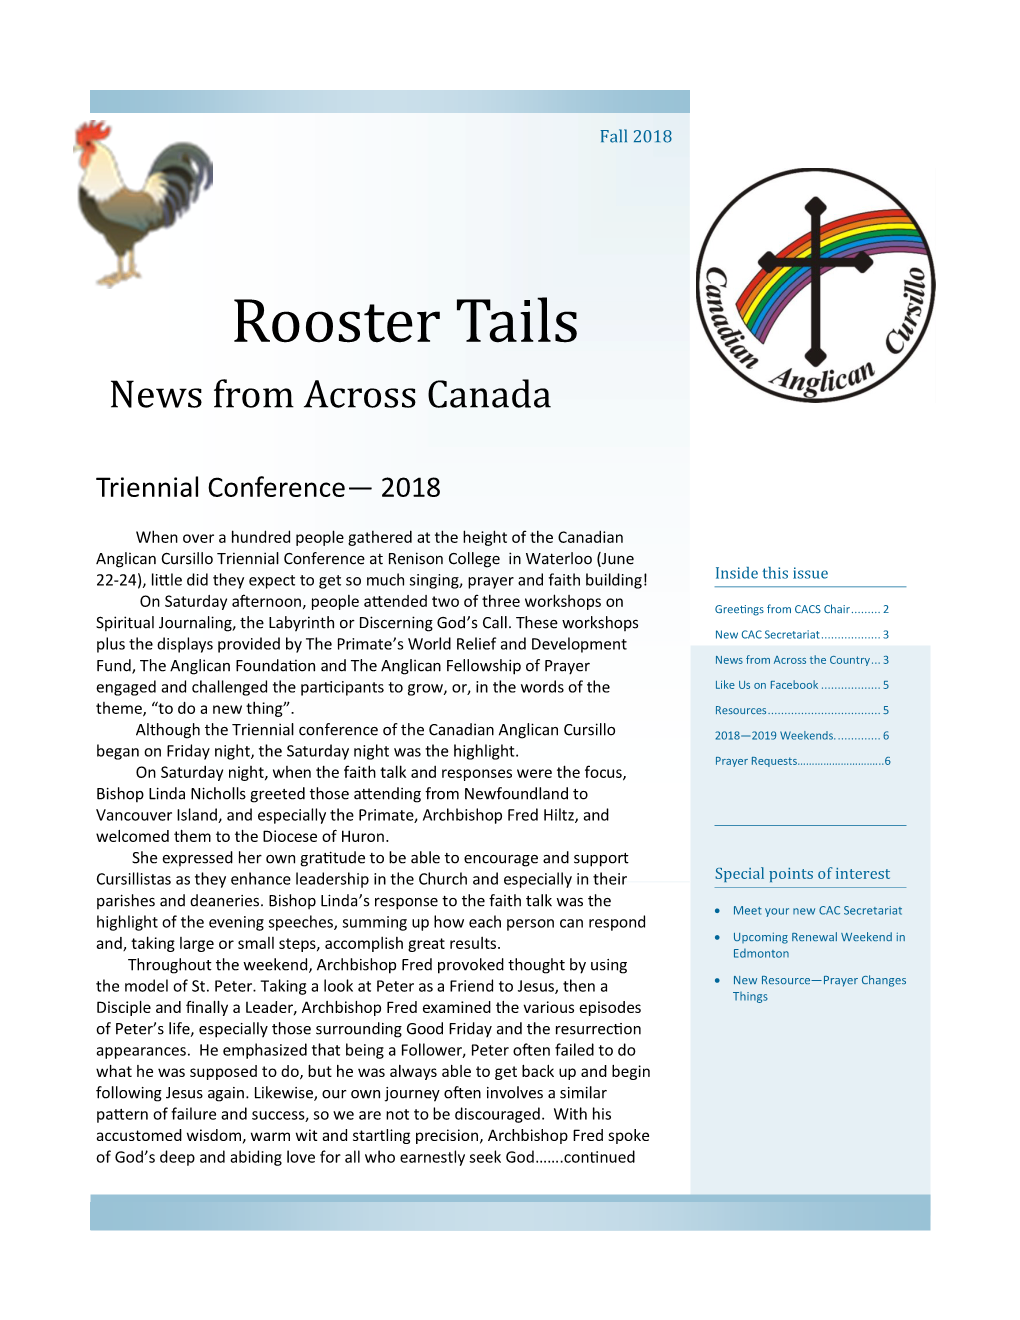 Rooster Tails News from Across Canada